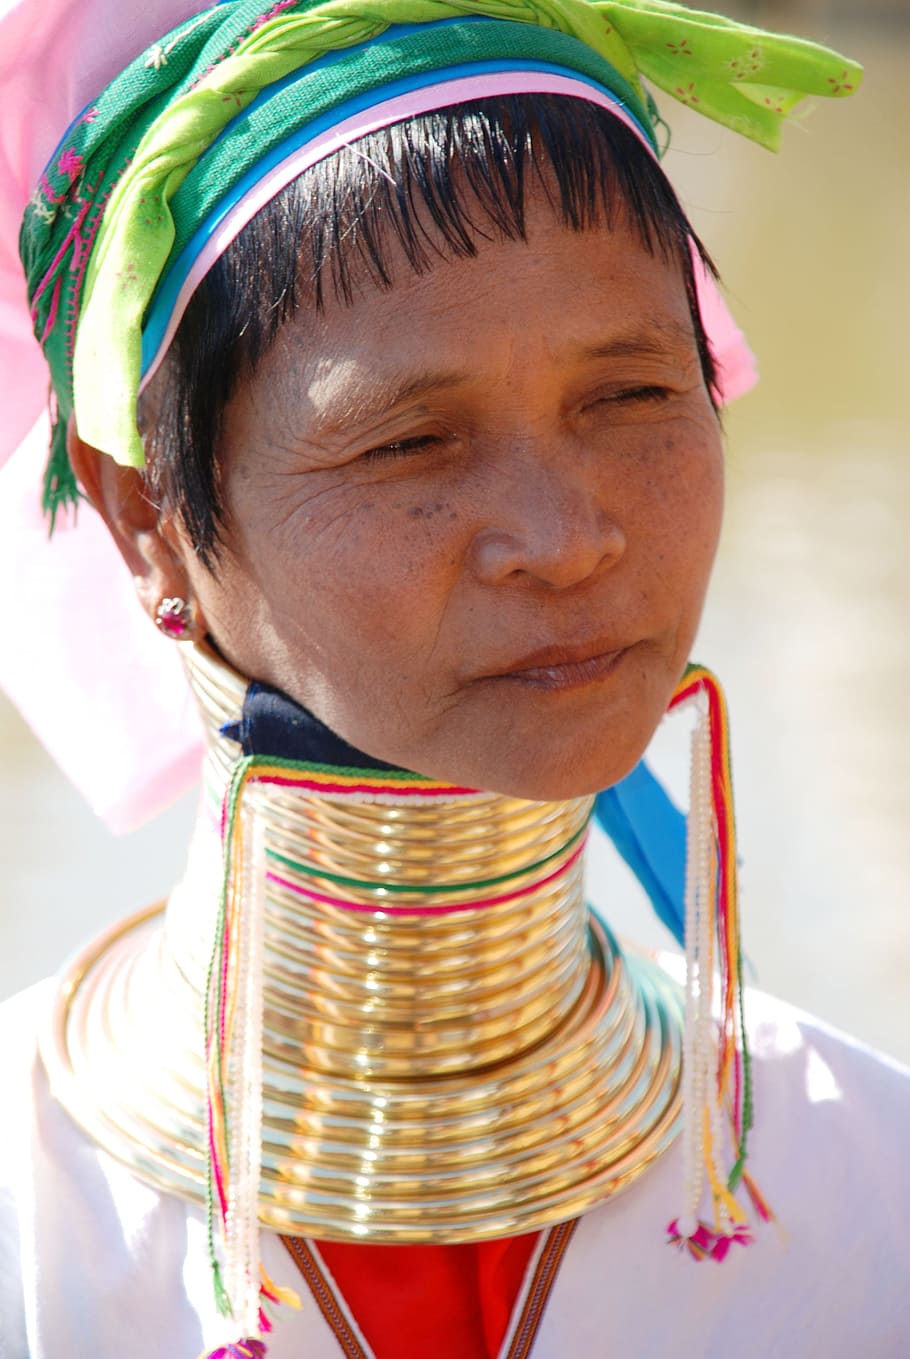 burma, woman, long neck women, indigenous culture, one person, headshot, real people, portrait, front view, close-up